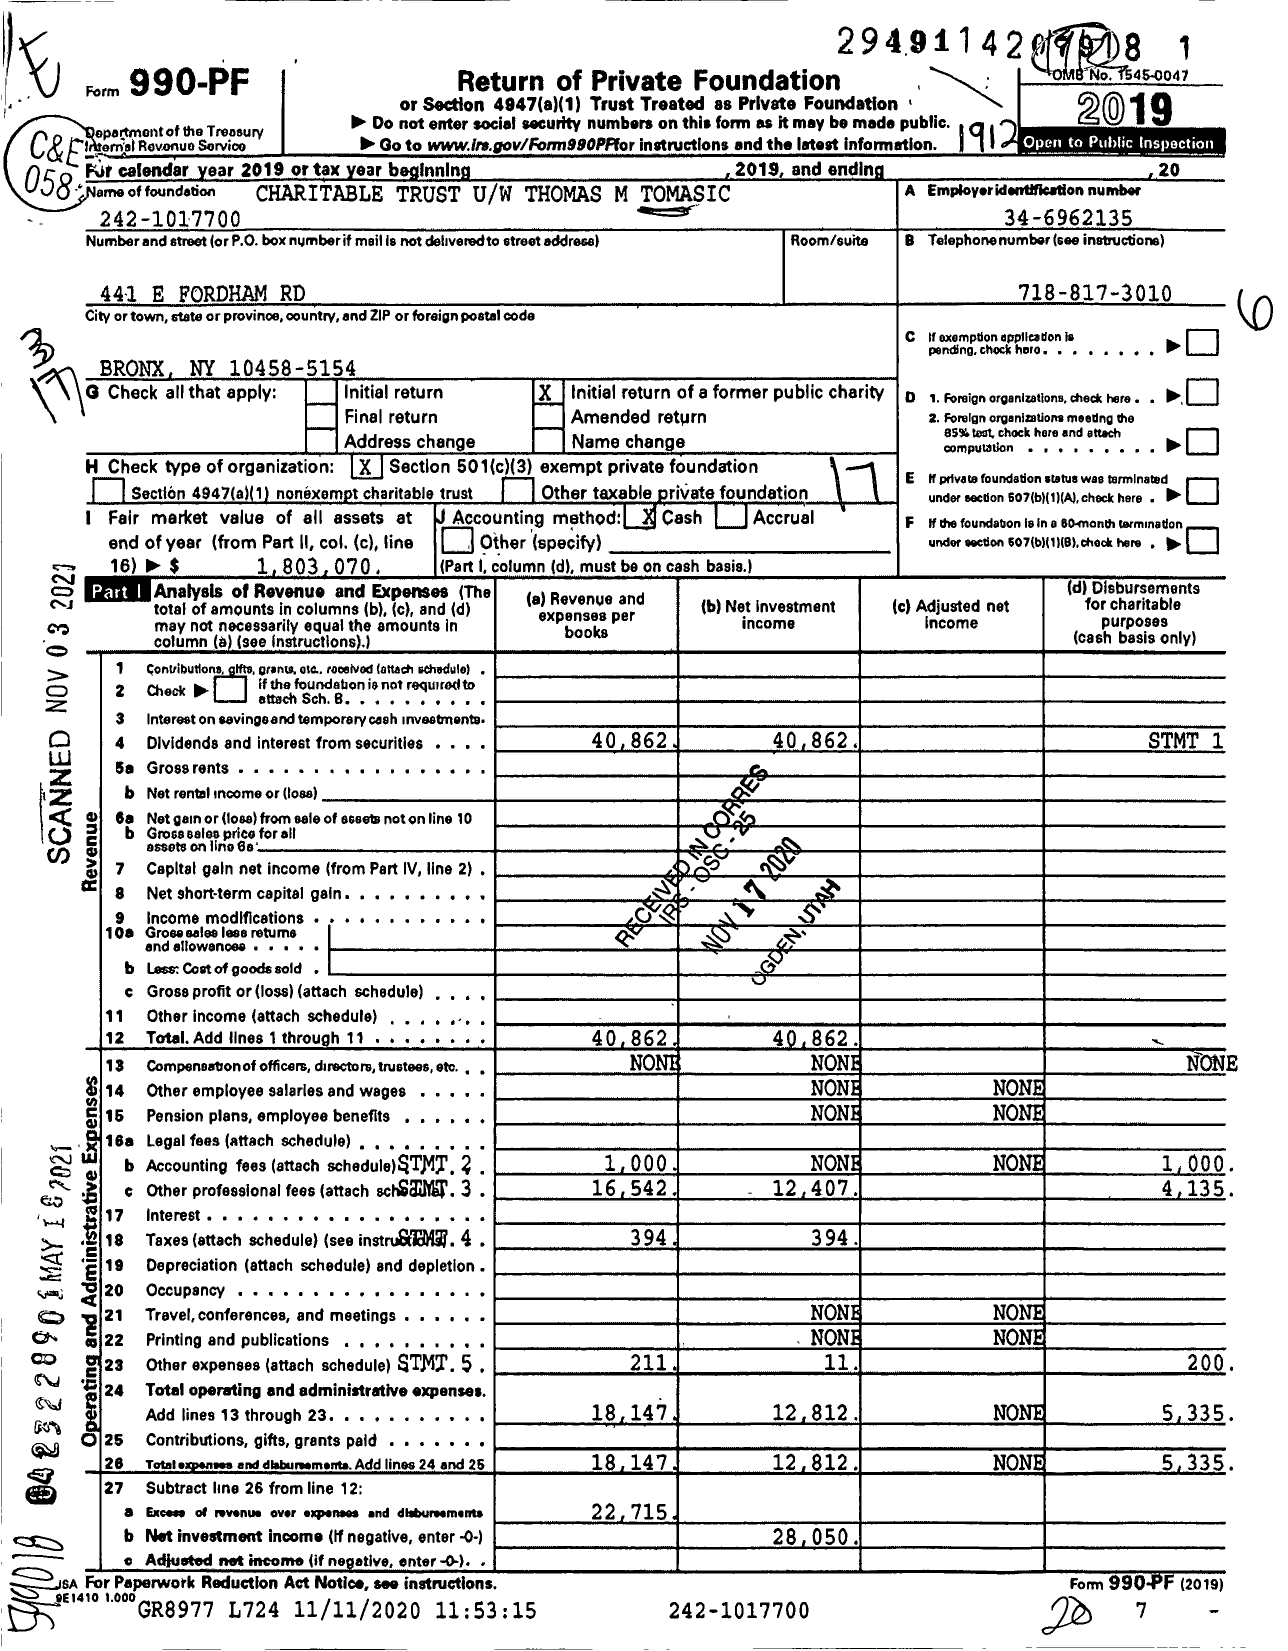 Image of first page of 2019 Form 990PF for Charitable Trust Uw Thomas M Tomasic